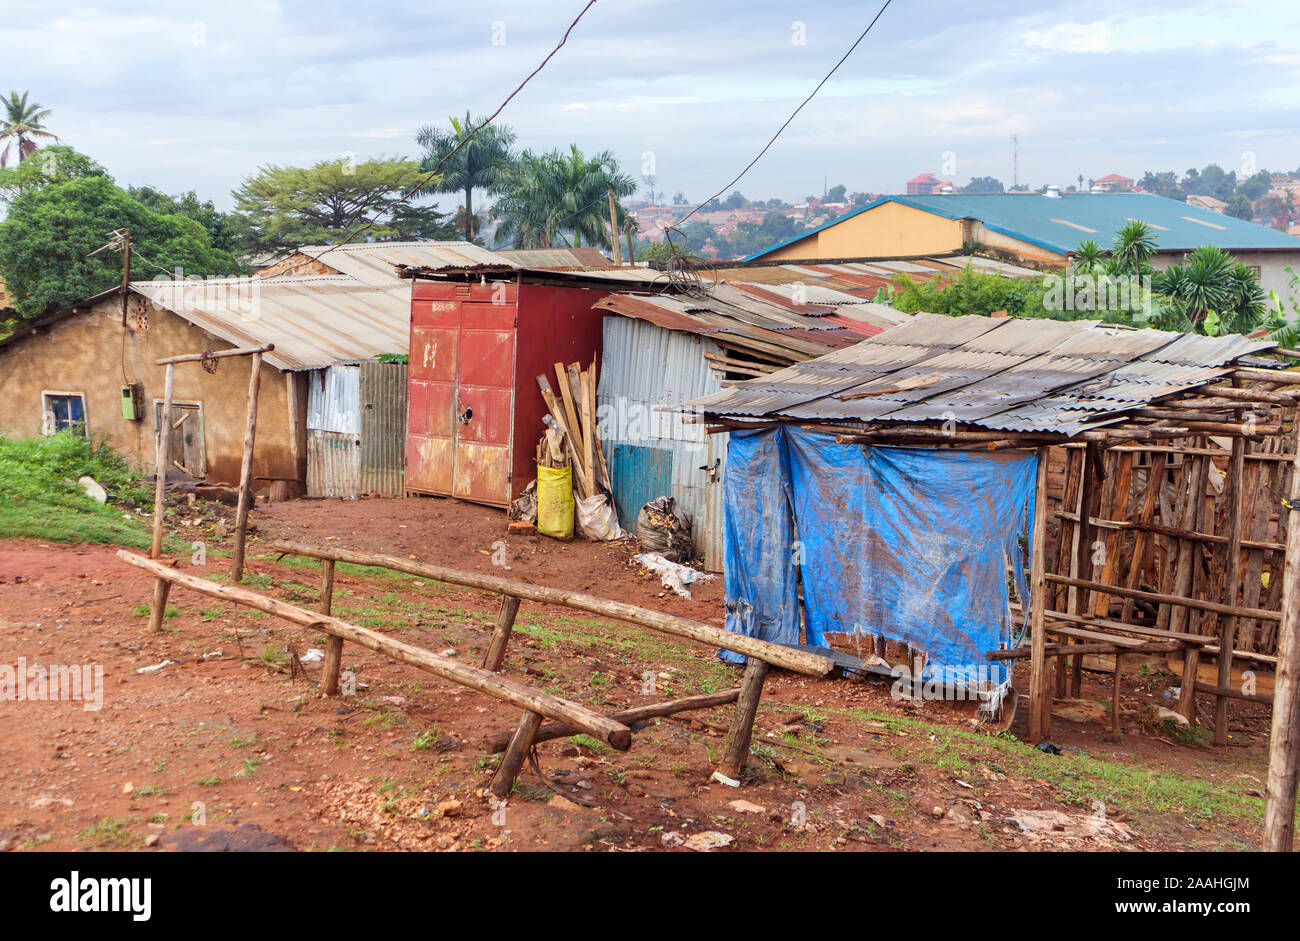 Roadside view of third world shanty town community buildings on the outskirts of Kampala, Central Region, Uganda with corrugated iron roof shacks Stock Photo